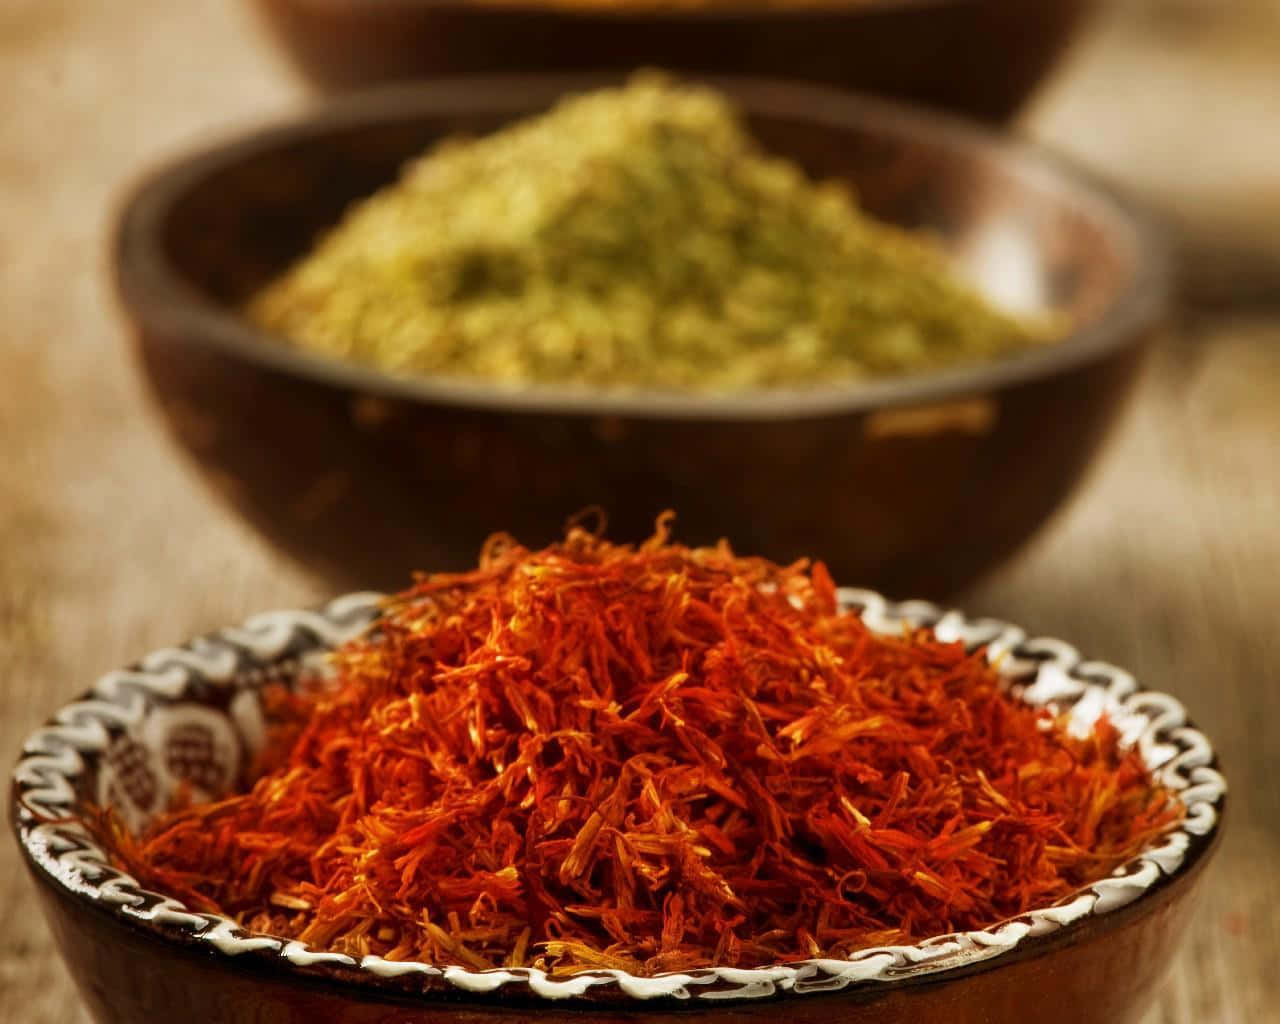 Saffron In Bowls On A Wooden Table